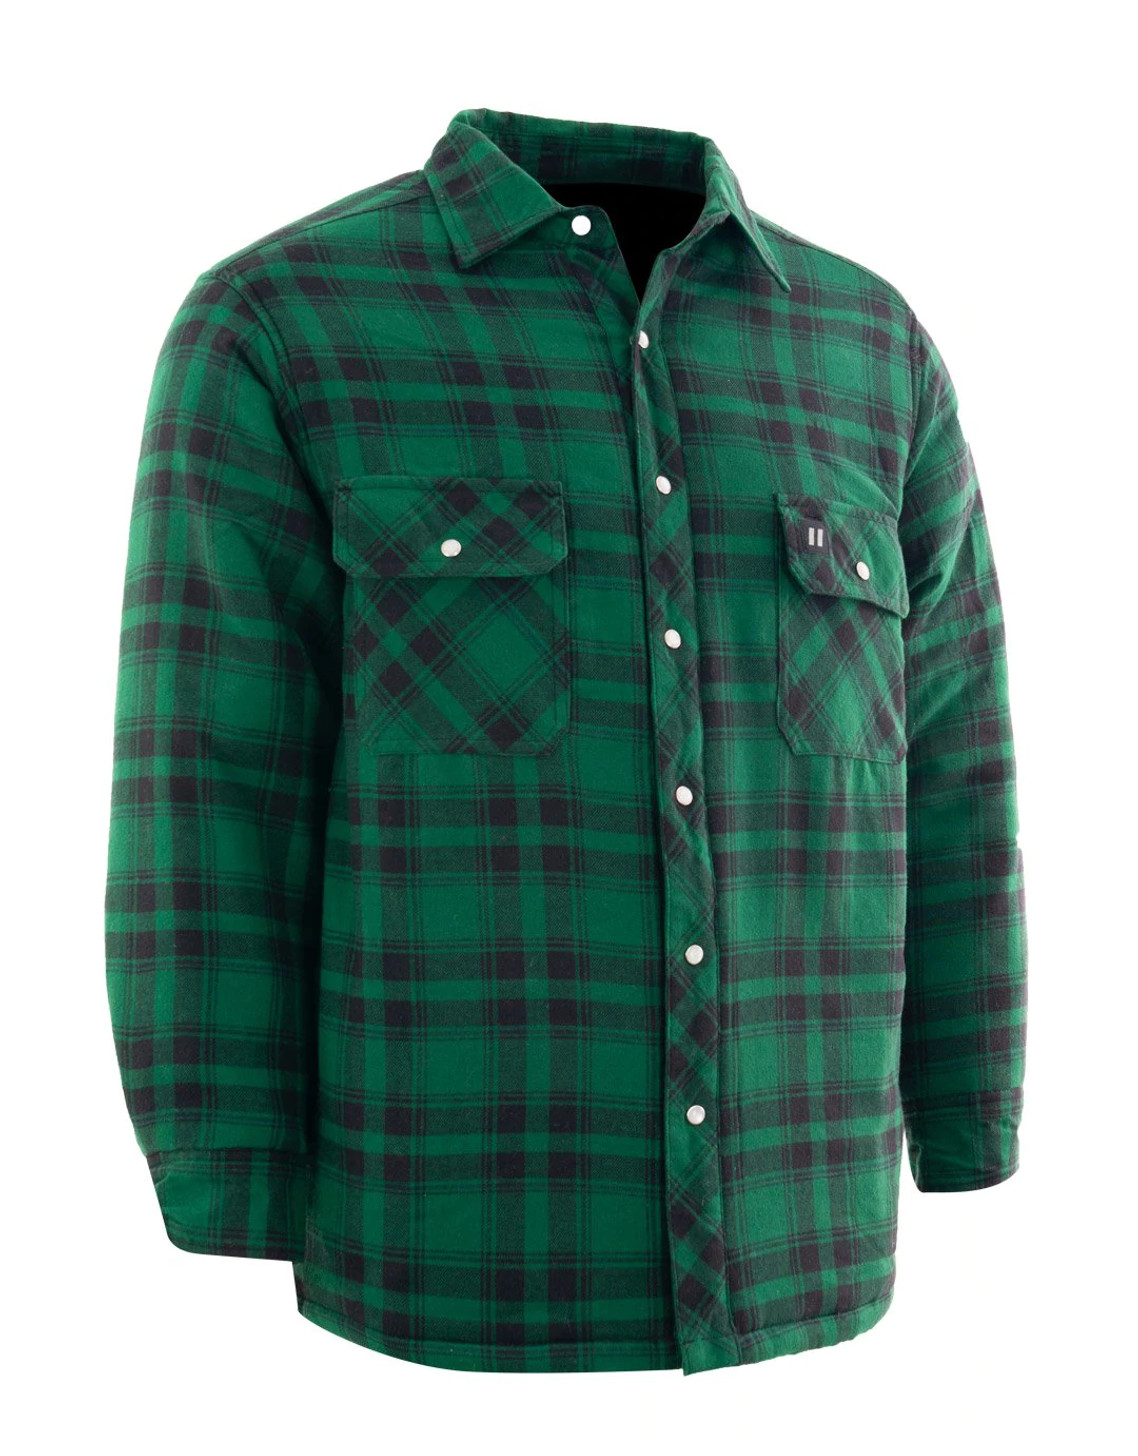 Forcefield Green Plaid Quilted Flannel Shirt | SafetyApparel.ca